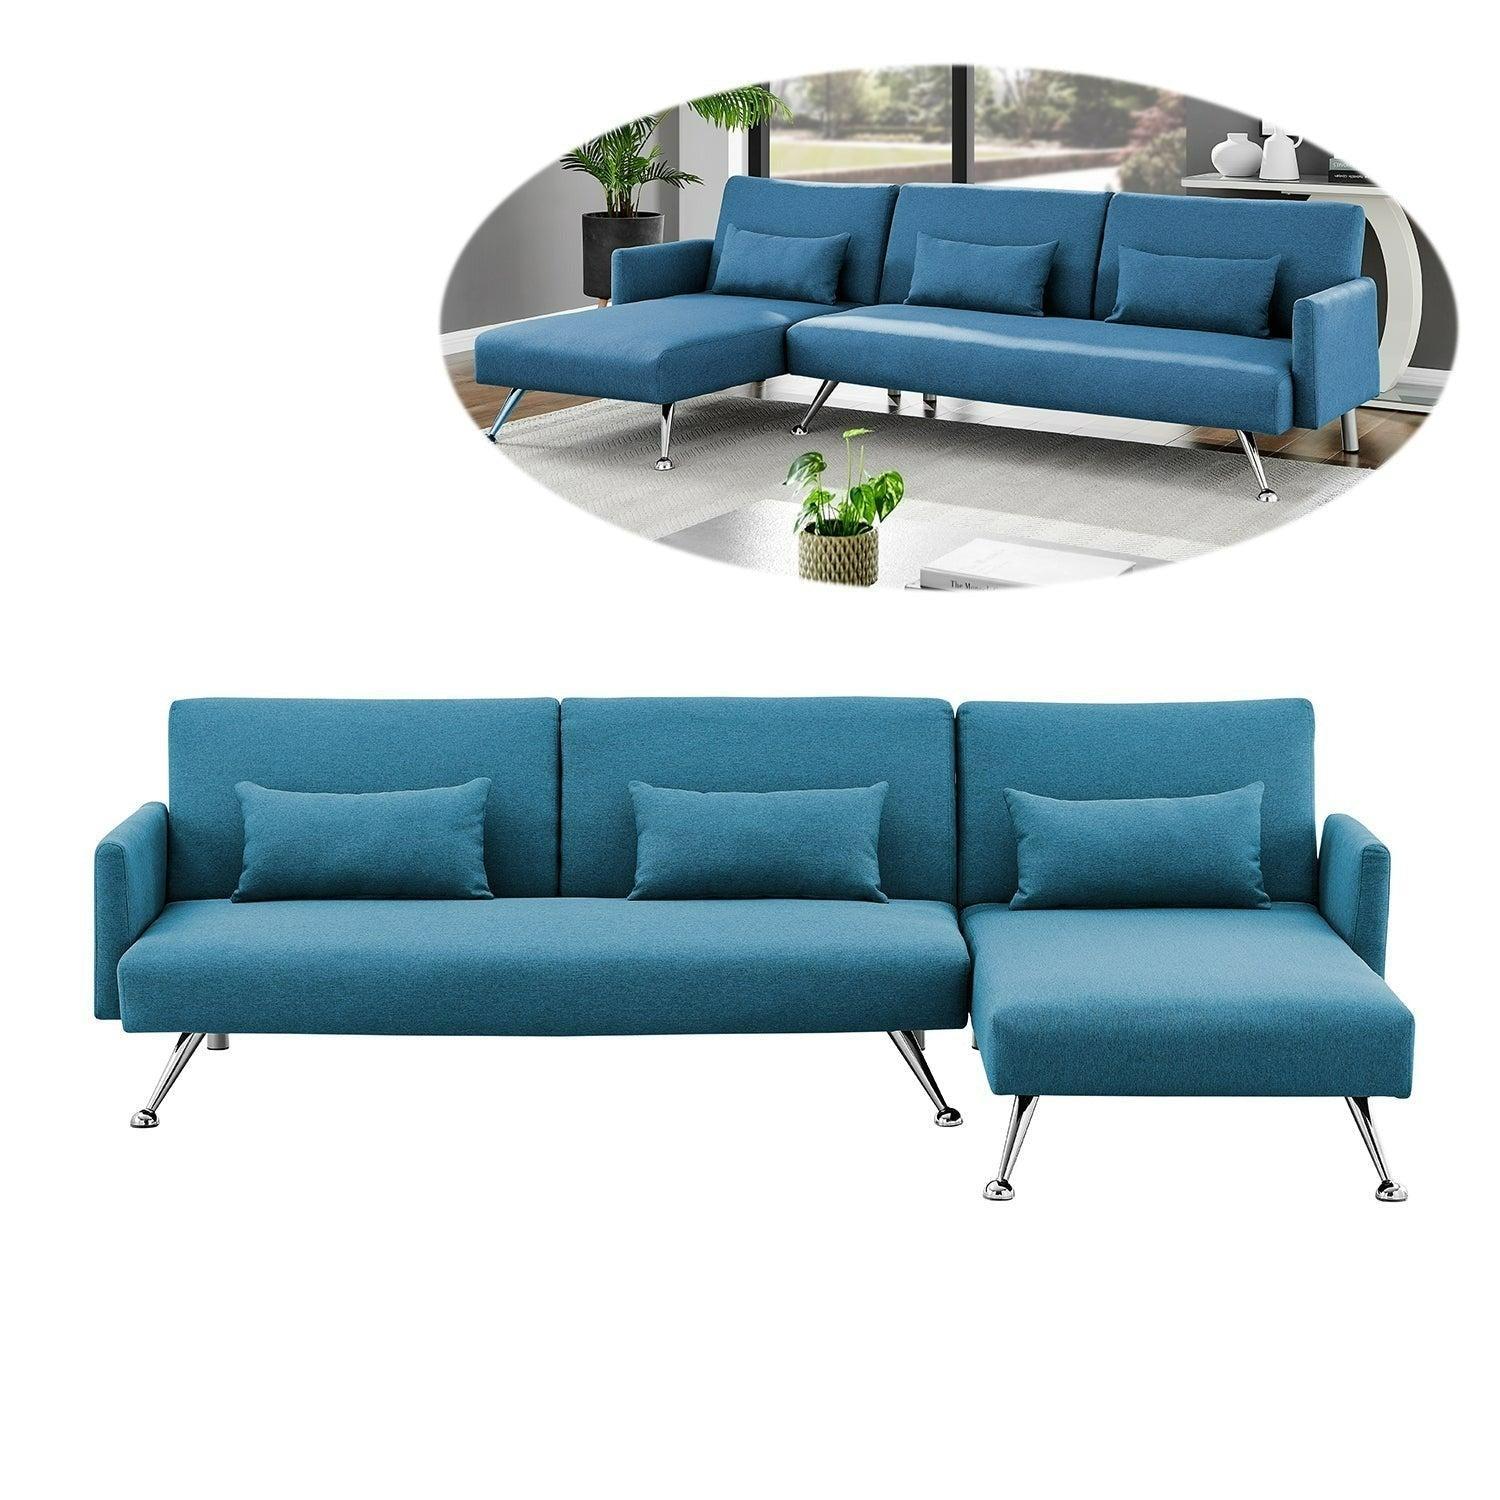 Foret 3 Seater Sofa Bed Modular Corner Lounge Recliner Couch